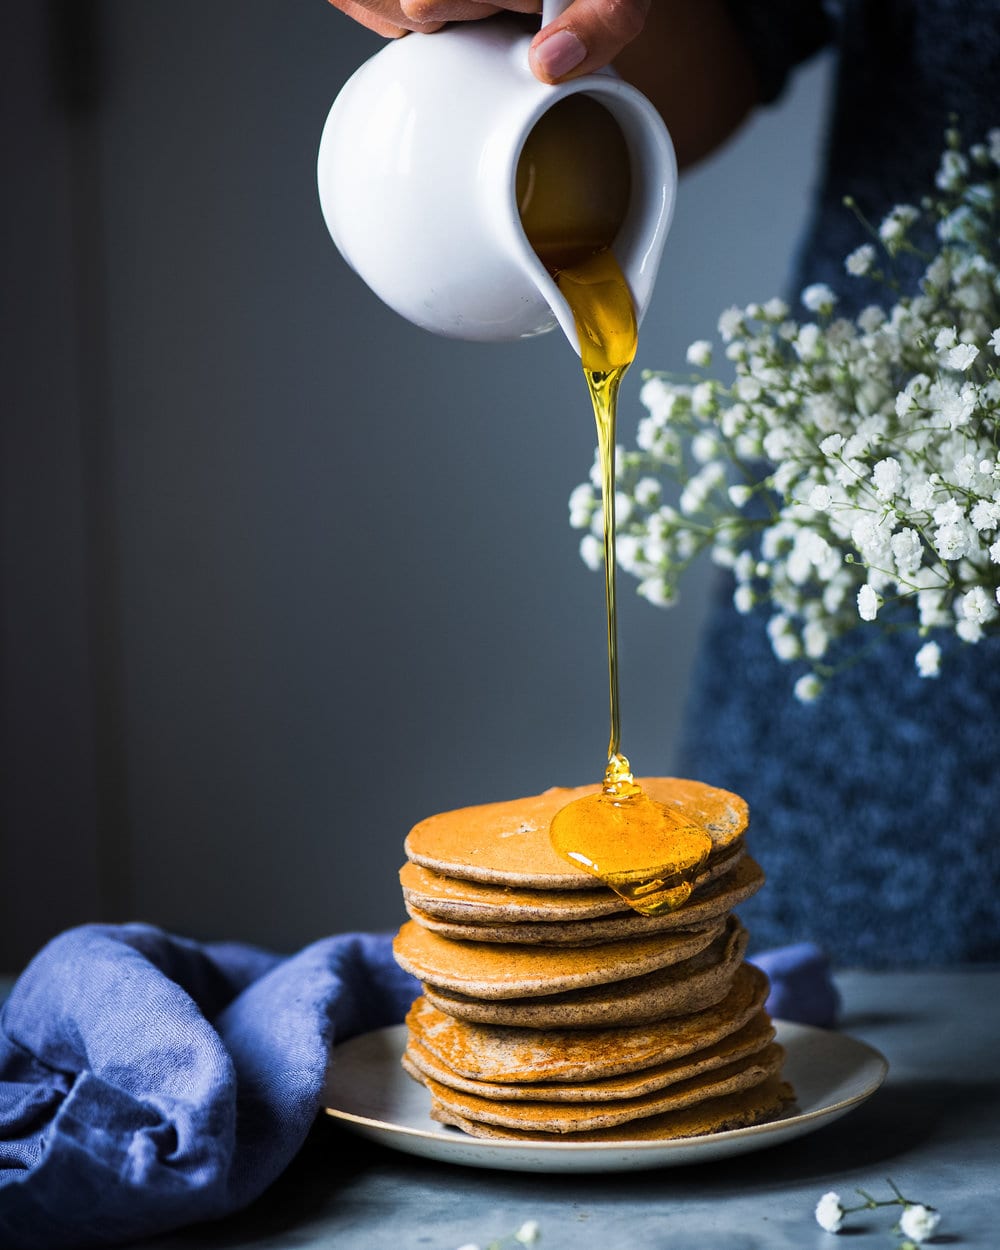 Side view of maple syrup being poured onto tall stack of pancakes on a grey plate.